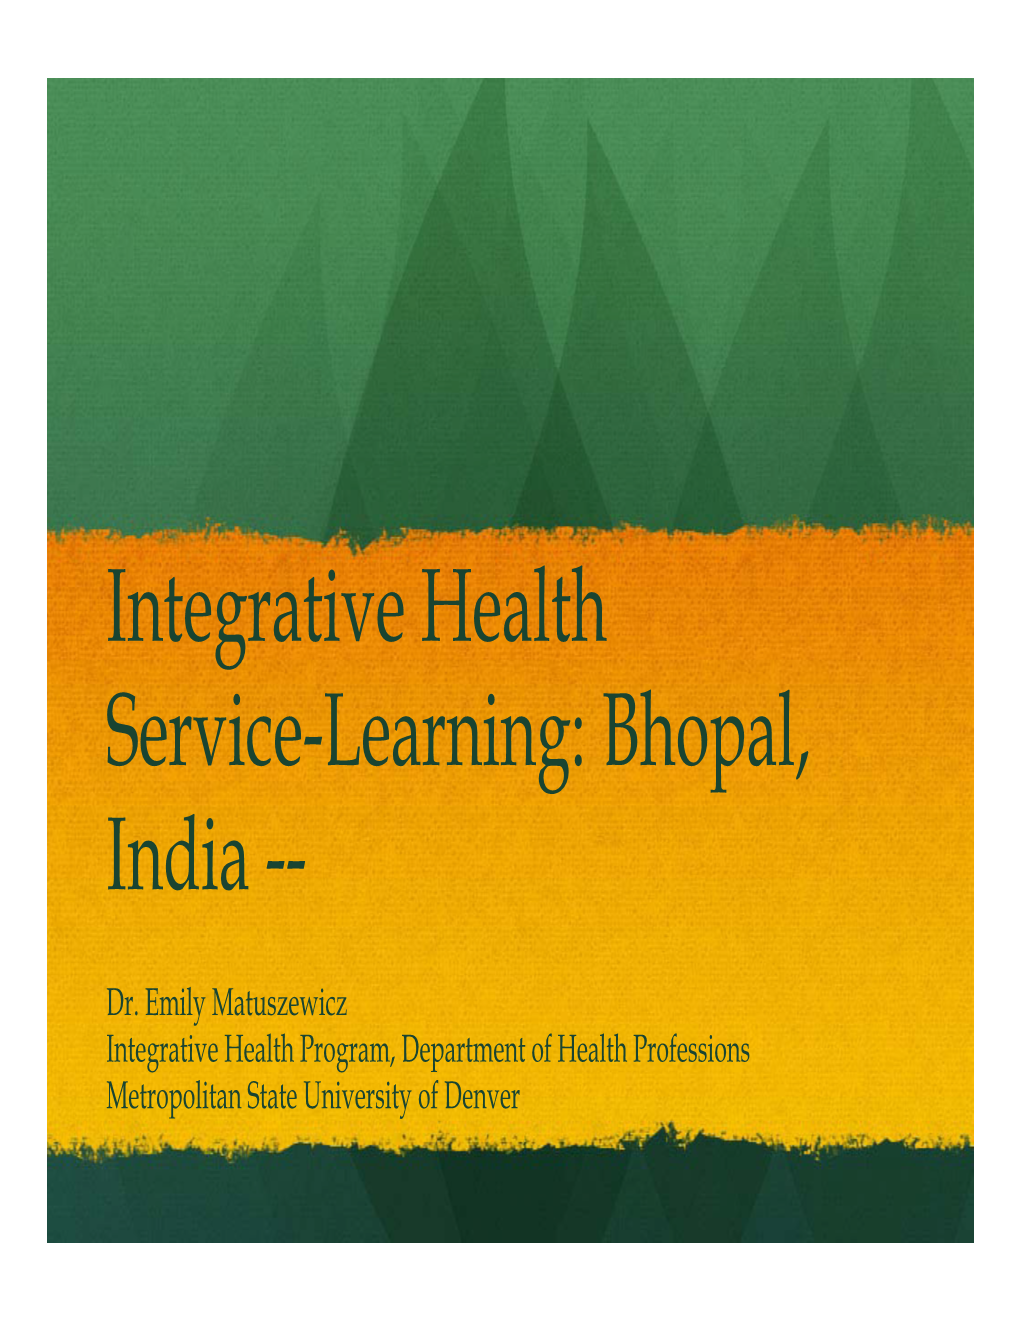 Integrative Health Service-Learning: Bhopal, India